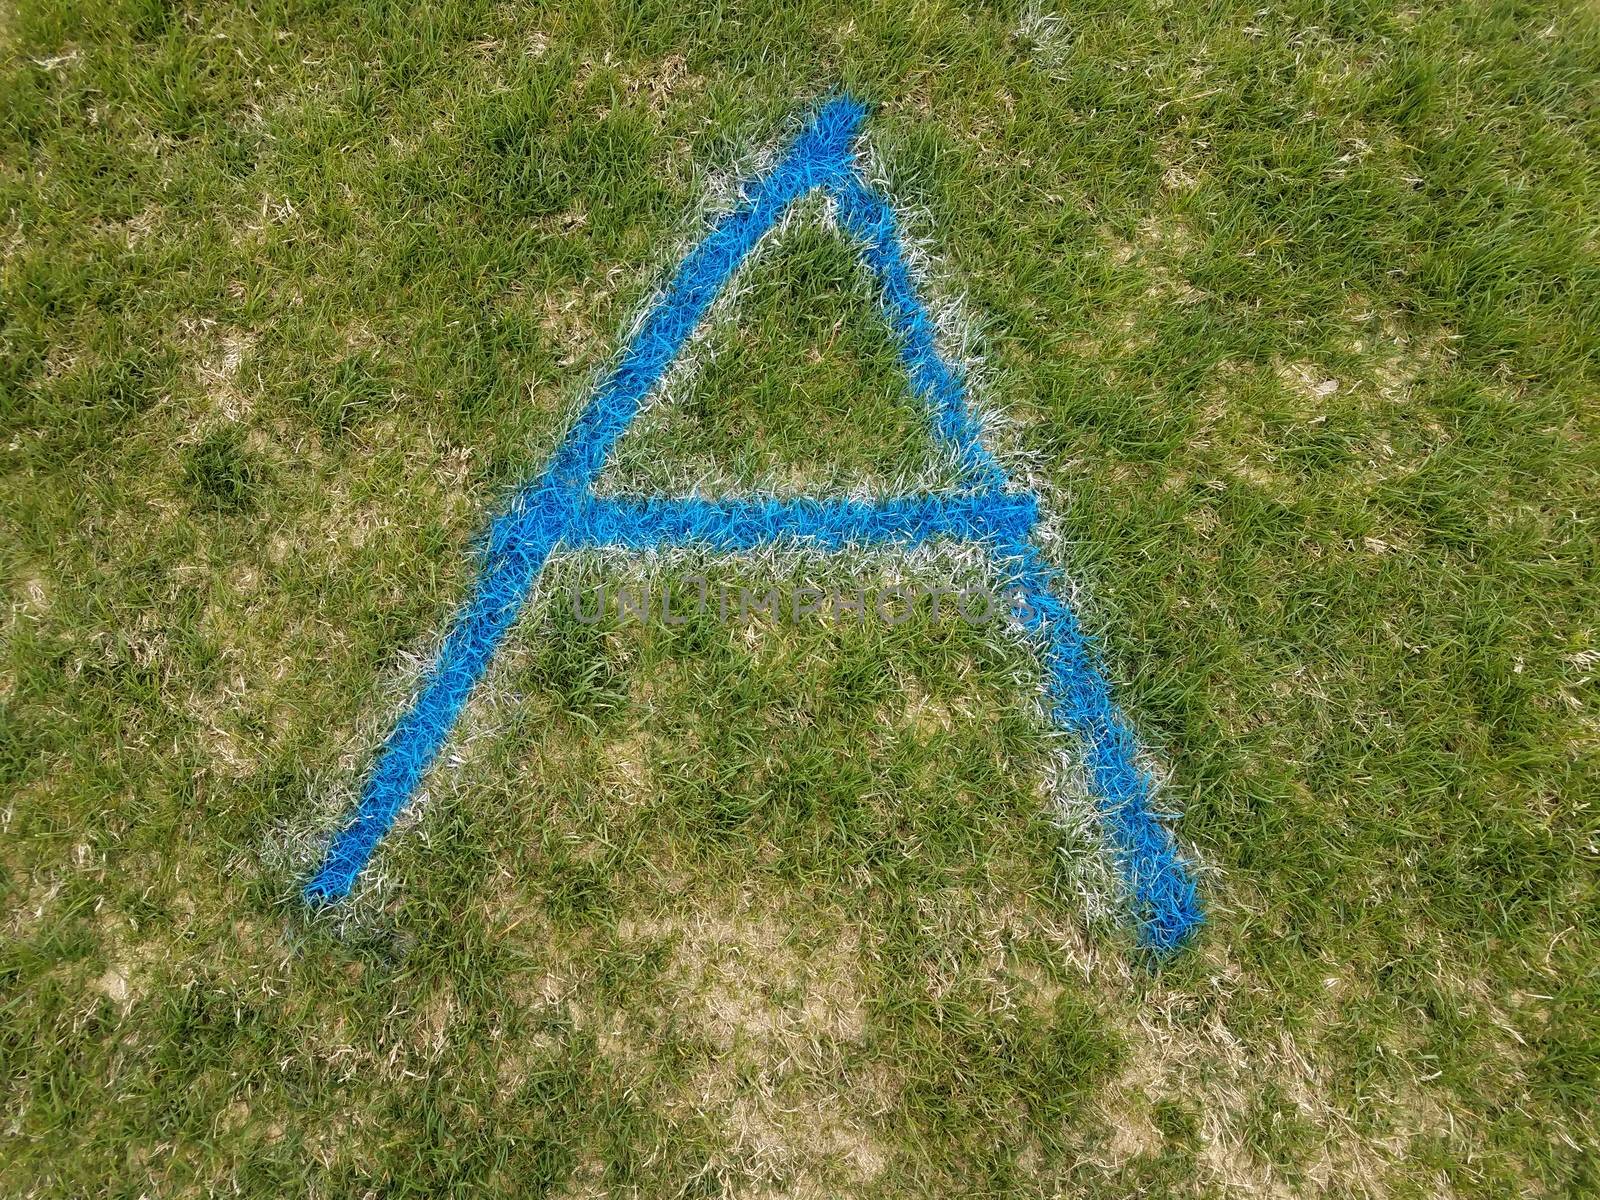 blue letter A spray painted on green grass or lawn